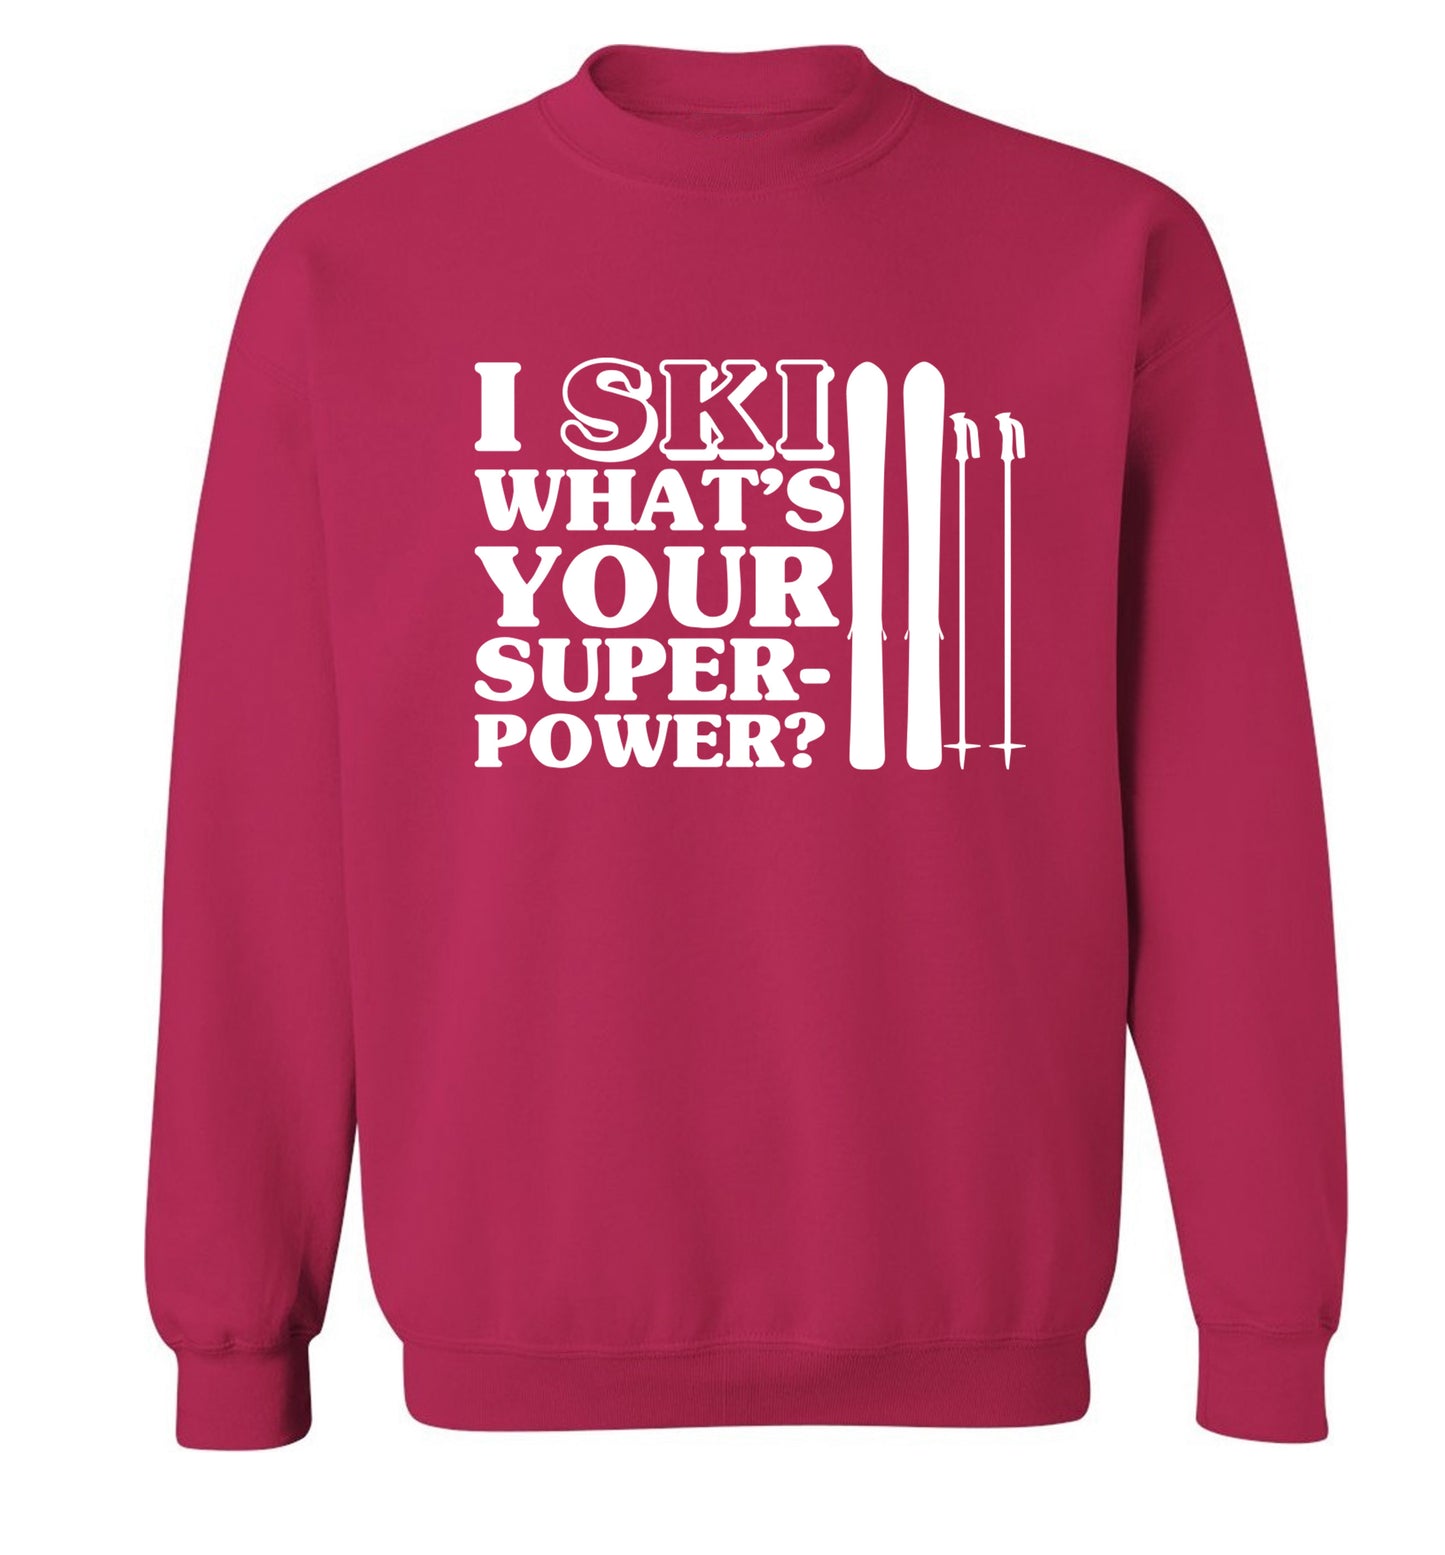 I ski what's your superpower? Adult's unisexpink Sweater 2XL